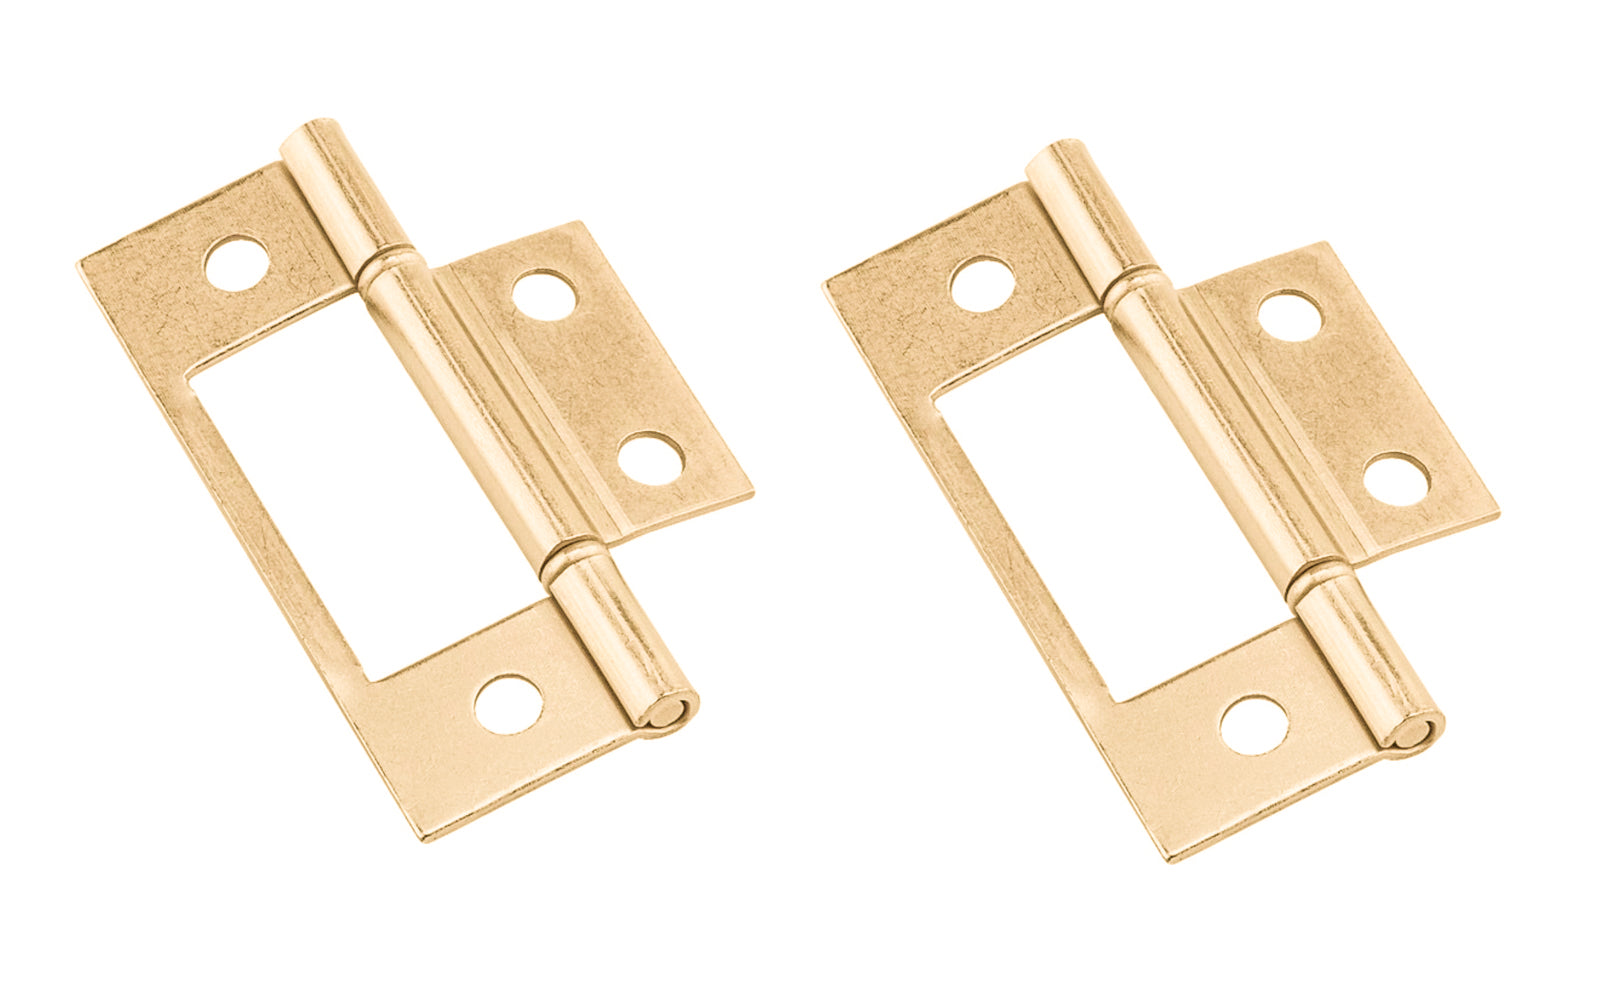 These non mortise hinges are designed for use on bi-fold doors at least 1" thick. Non-removable tight, non-rising pin. Surface mount, mortising is not required. Sold as 2 hinges in pack. National Hardware Model No. N146-951. 038613146952